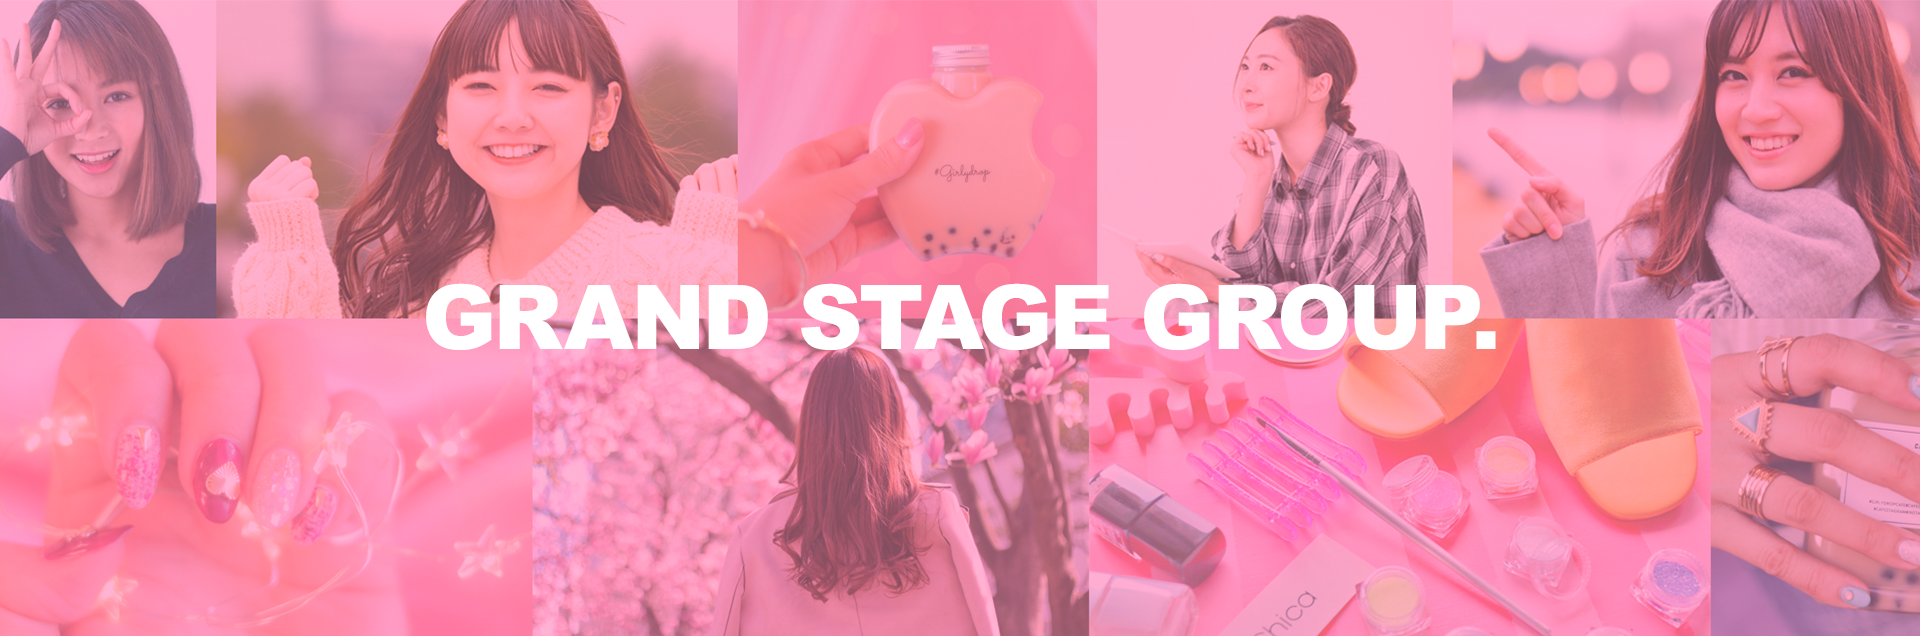 Grand Stage Group